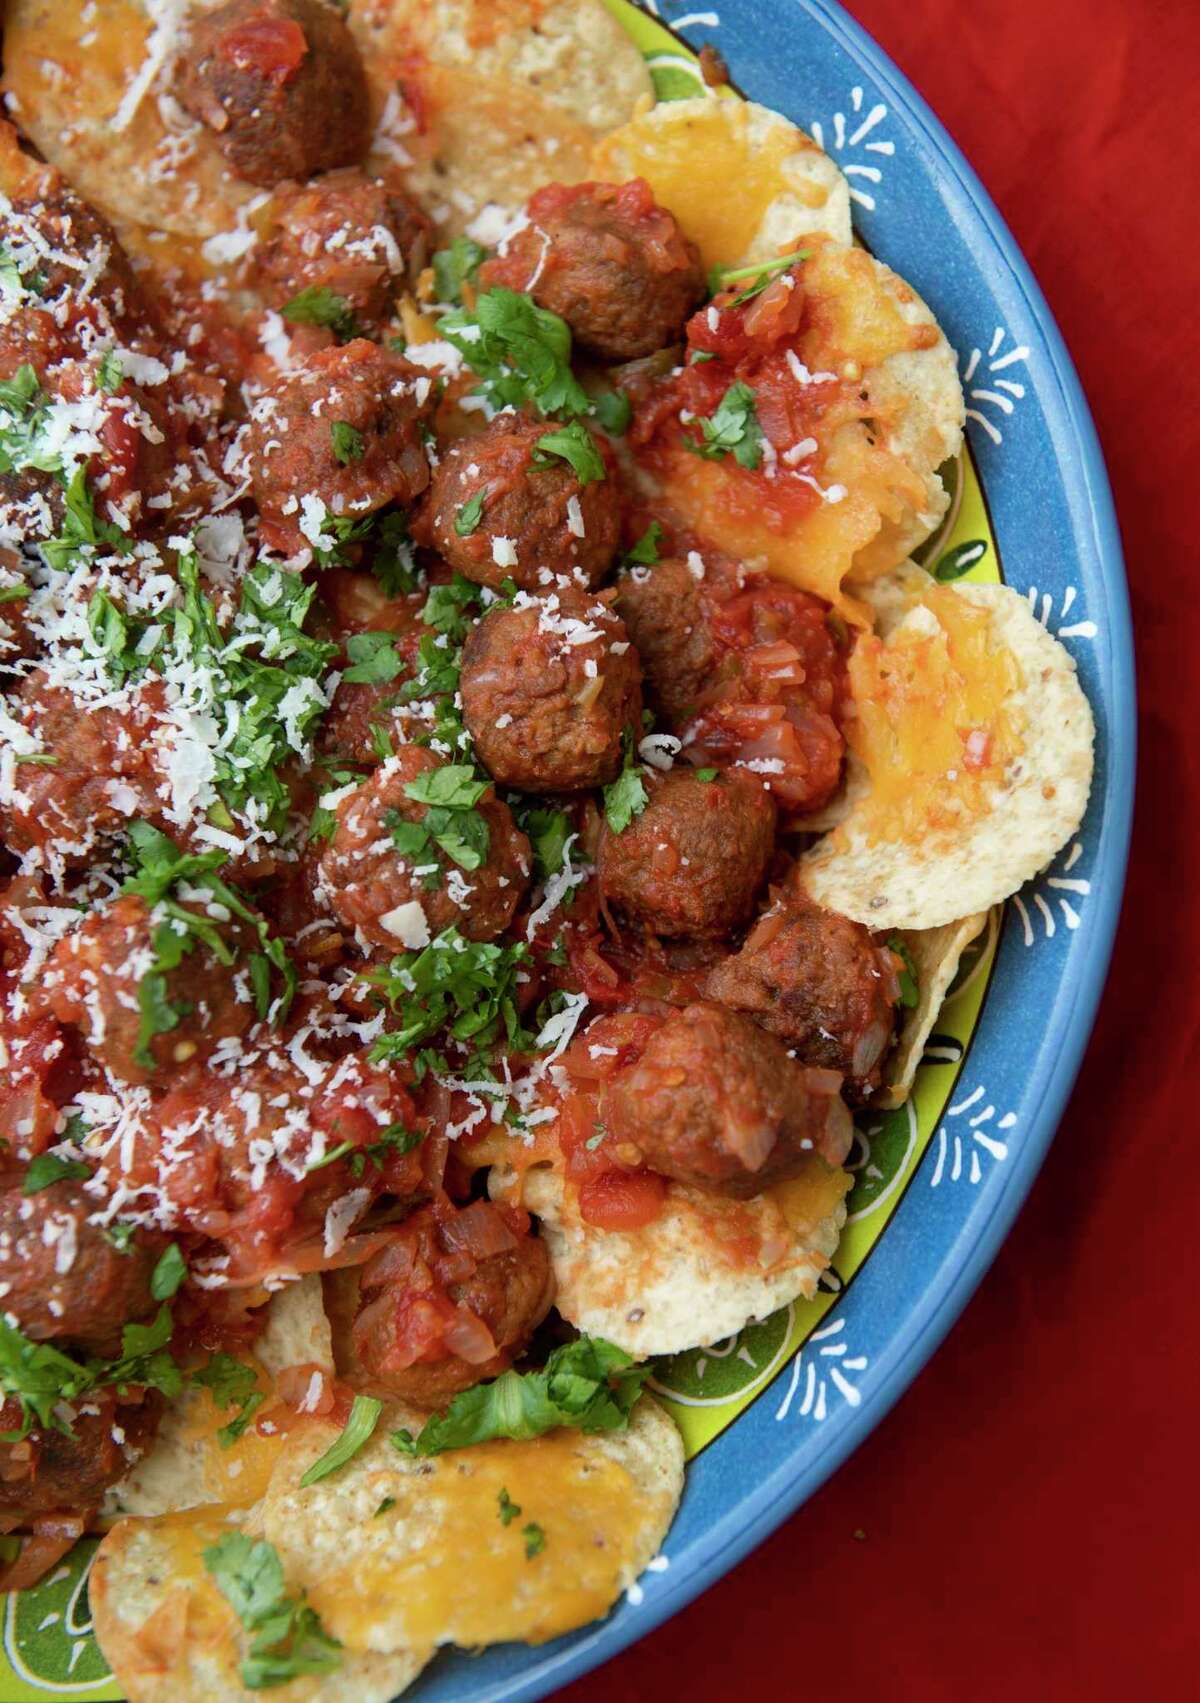 Load up the nachos and you’re set for football Sundays